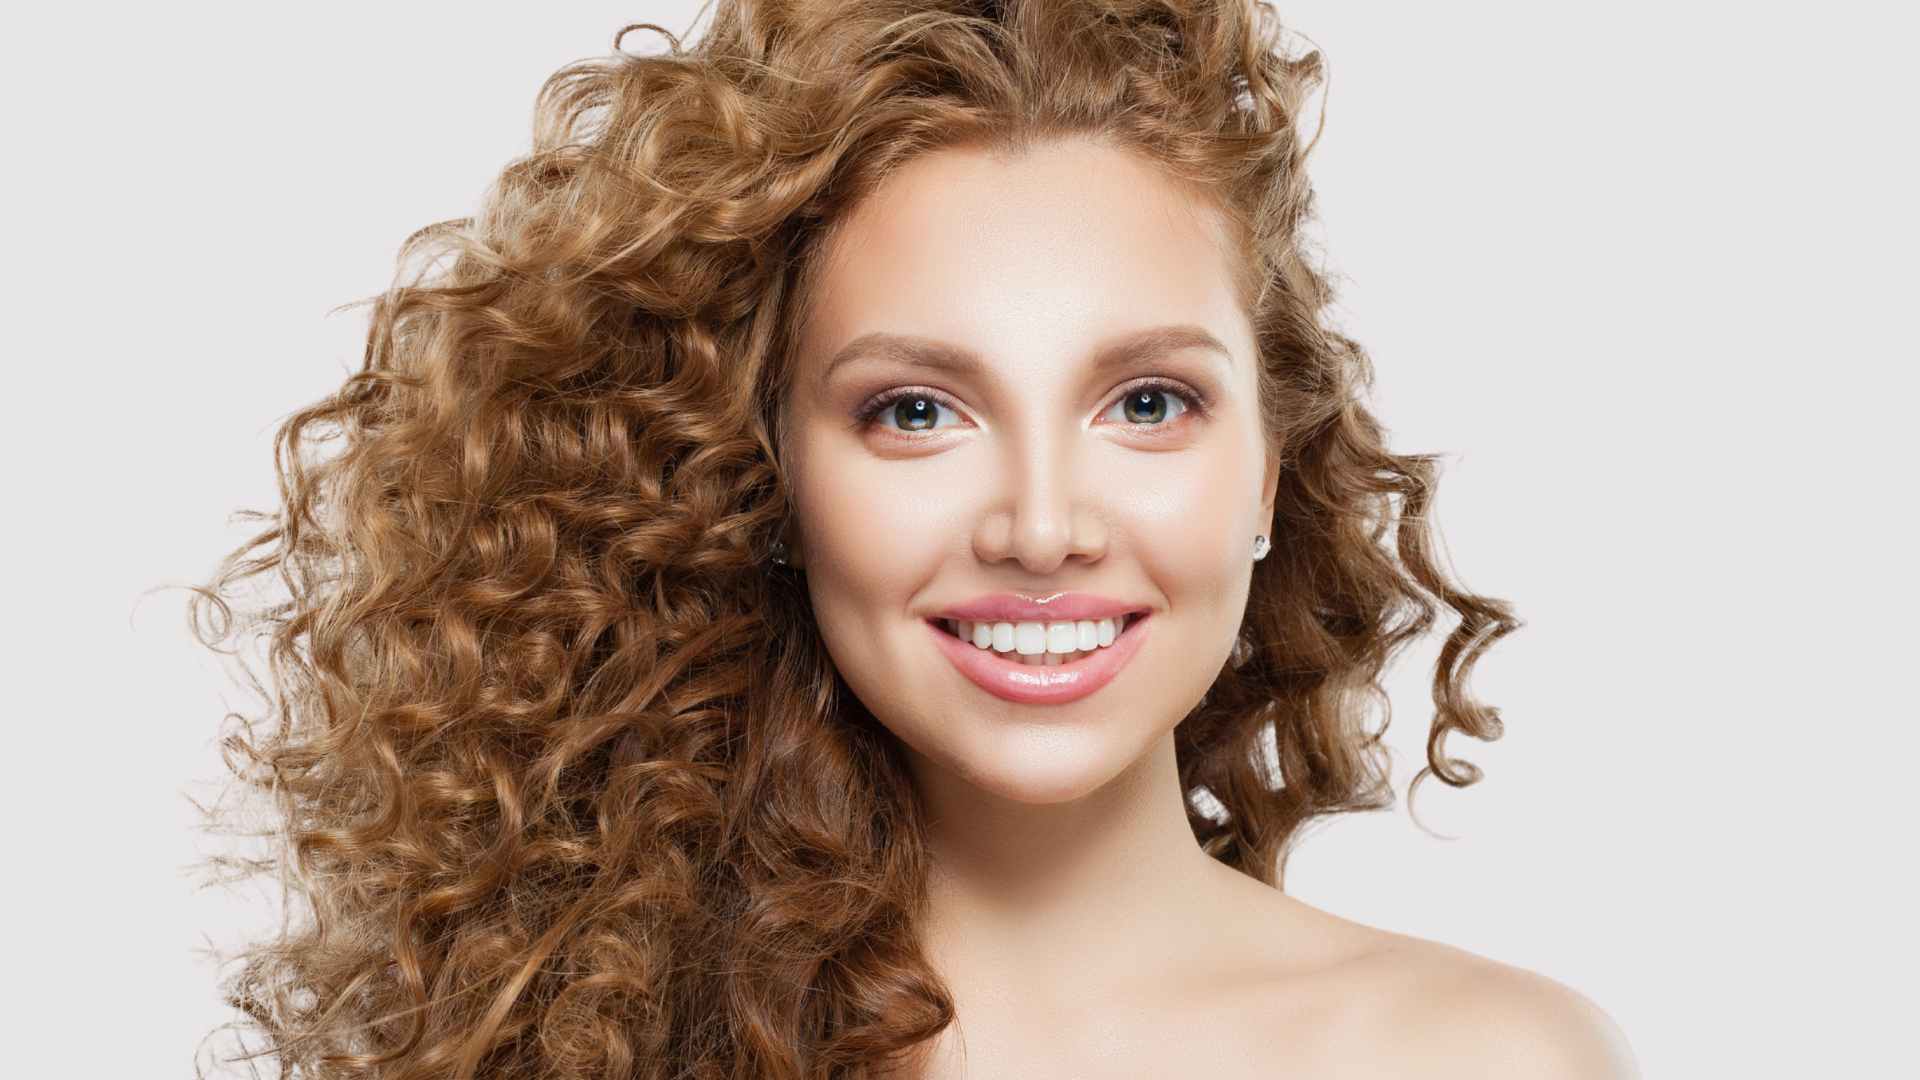 Female with long natural curly hair